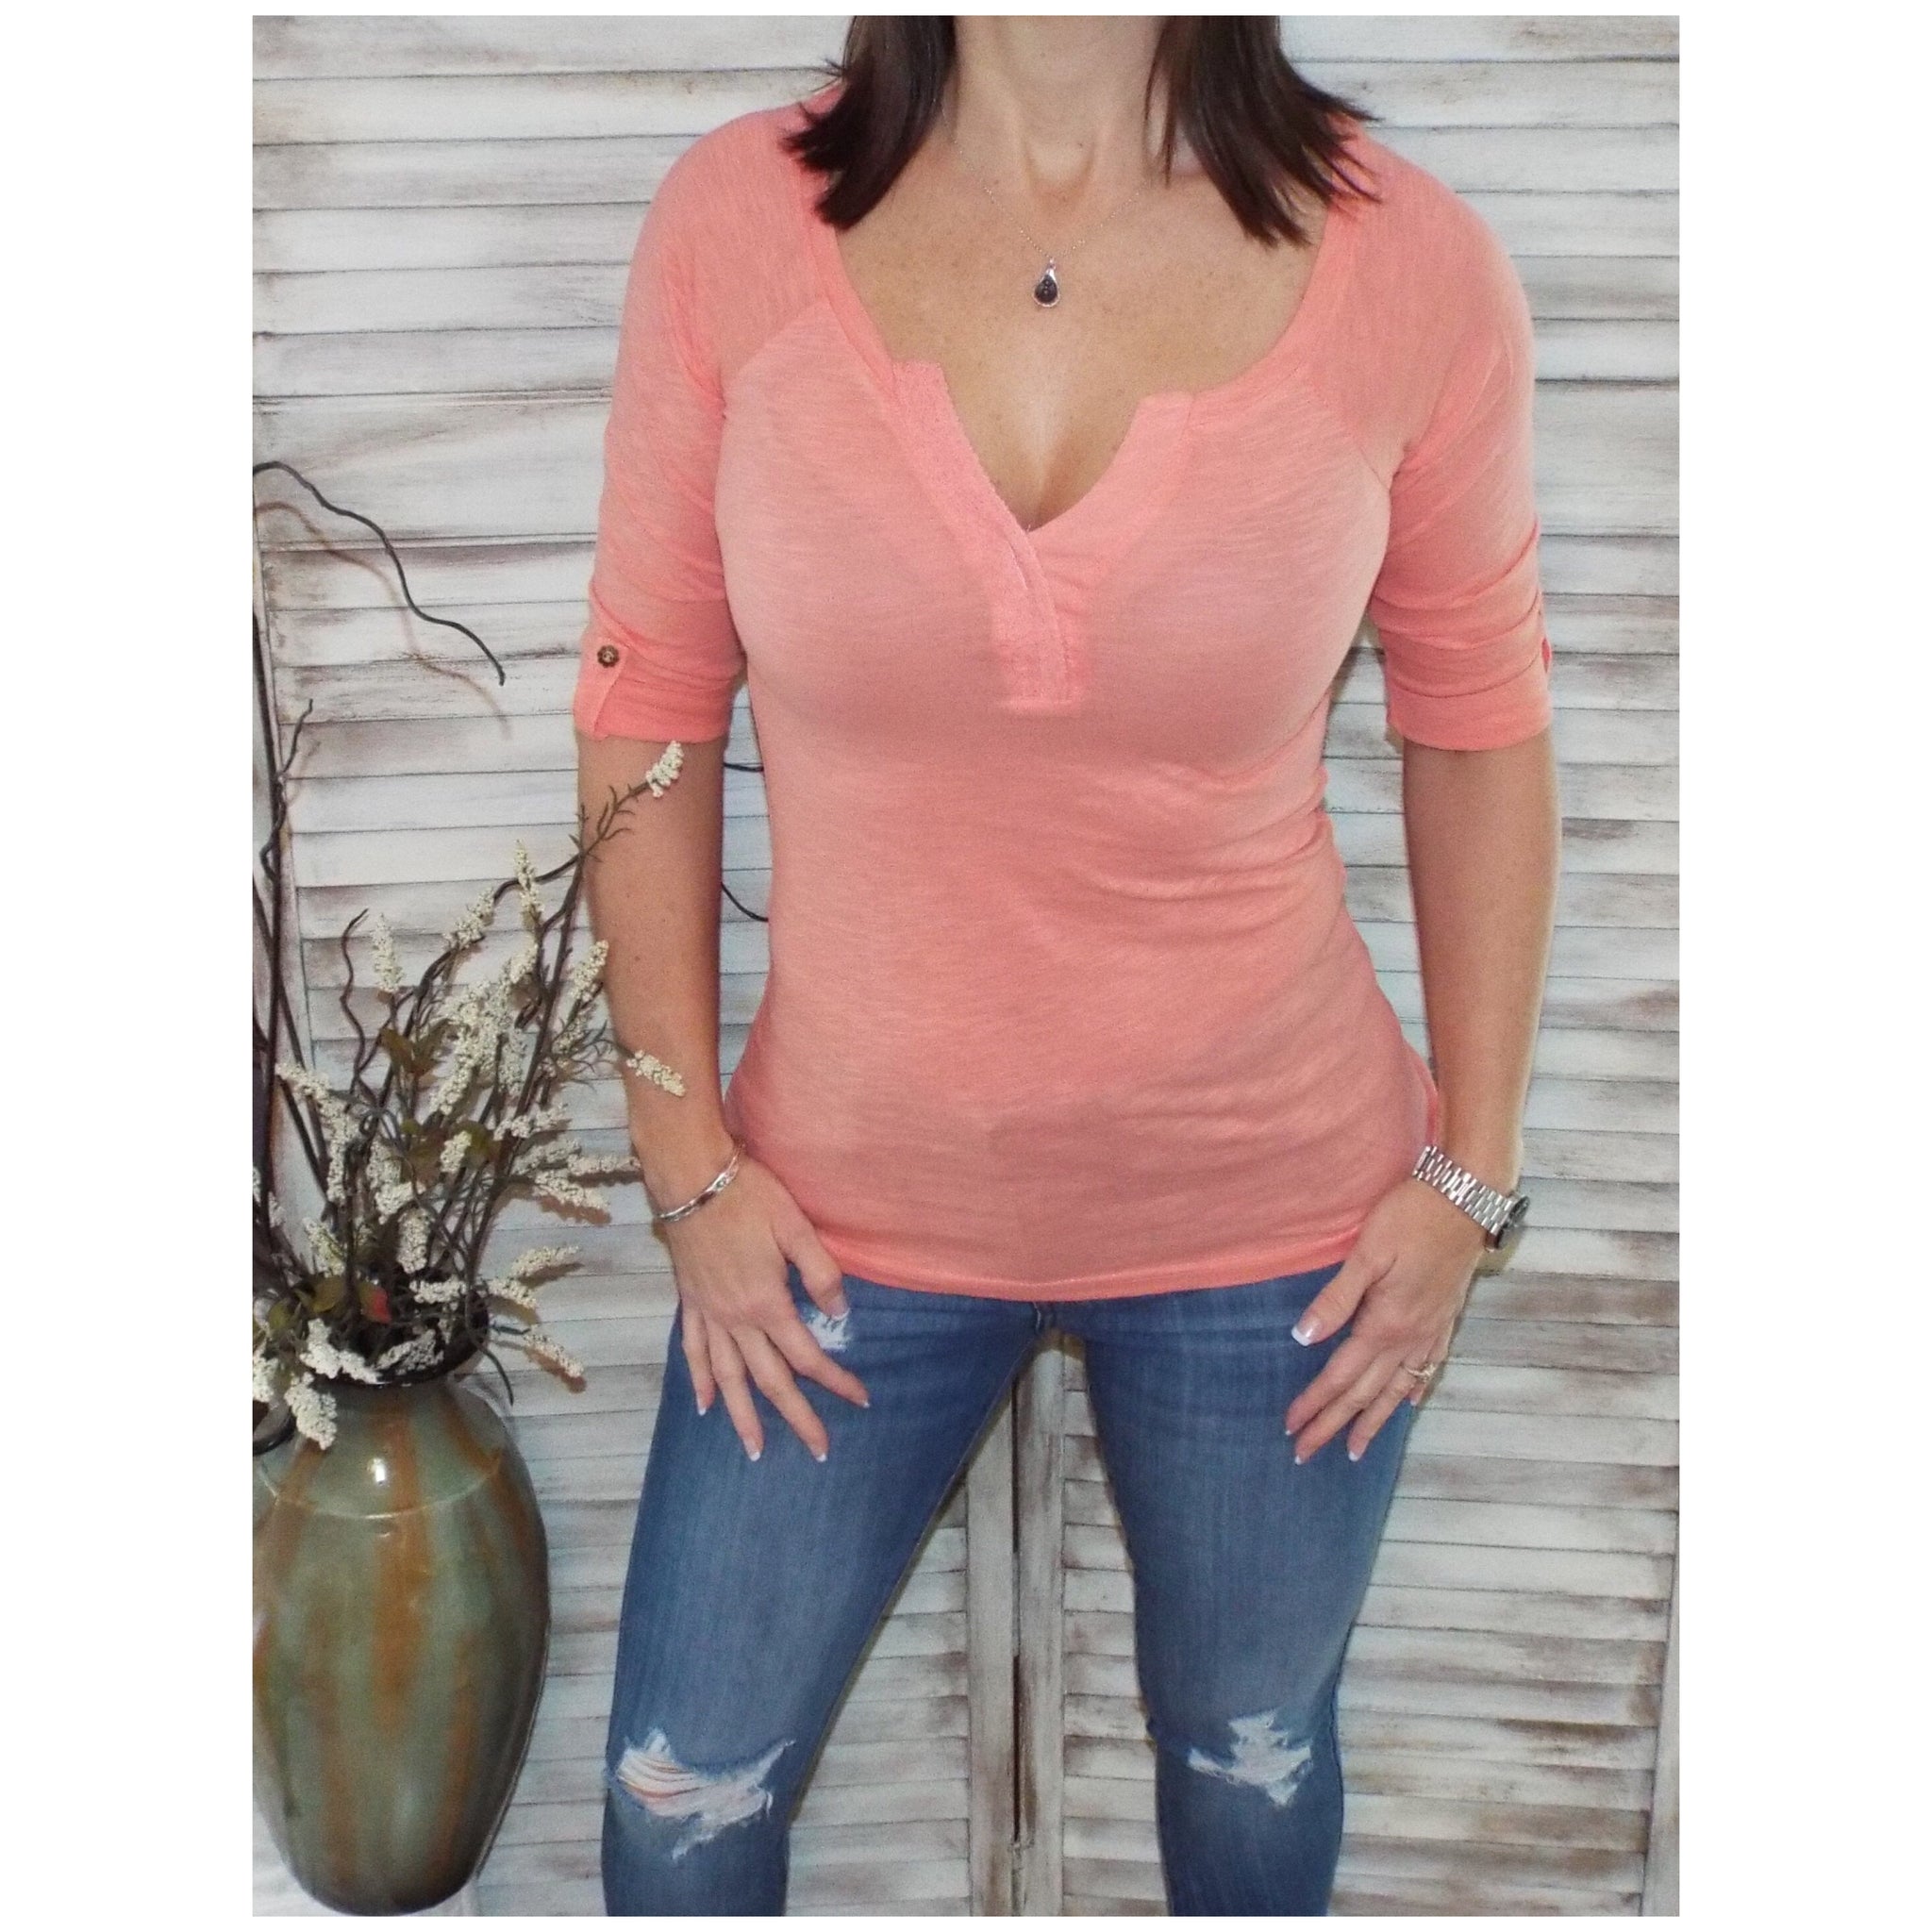 "Come Together" V-Neck Crochet Plunge Cleavage Military 3/4 Cuff Sleeve Top Peach S/M/L